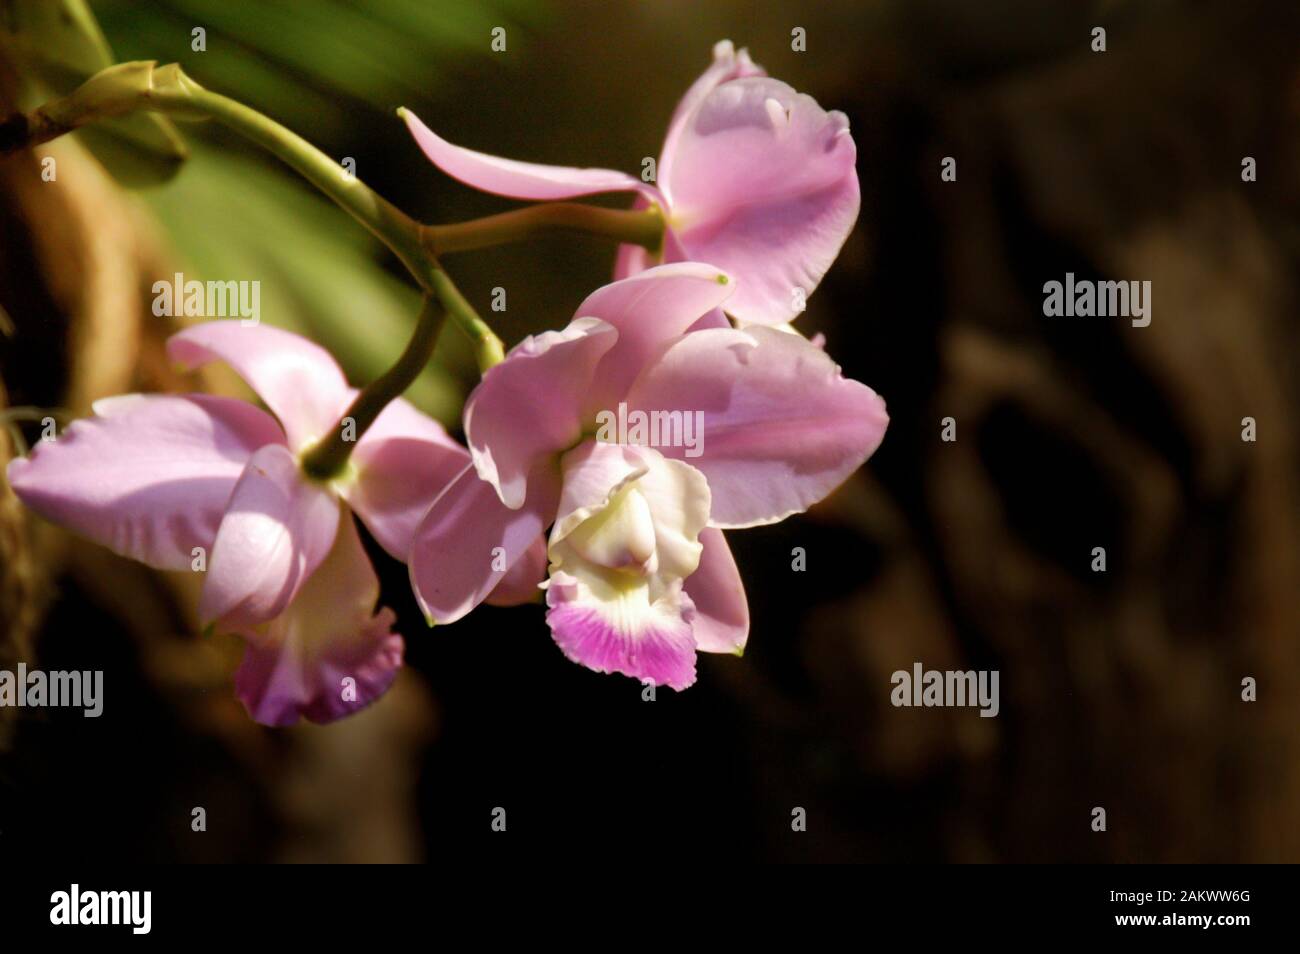 off center pink and purple orchid cluster close up with soft background Stock Photo